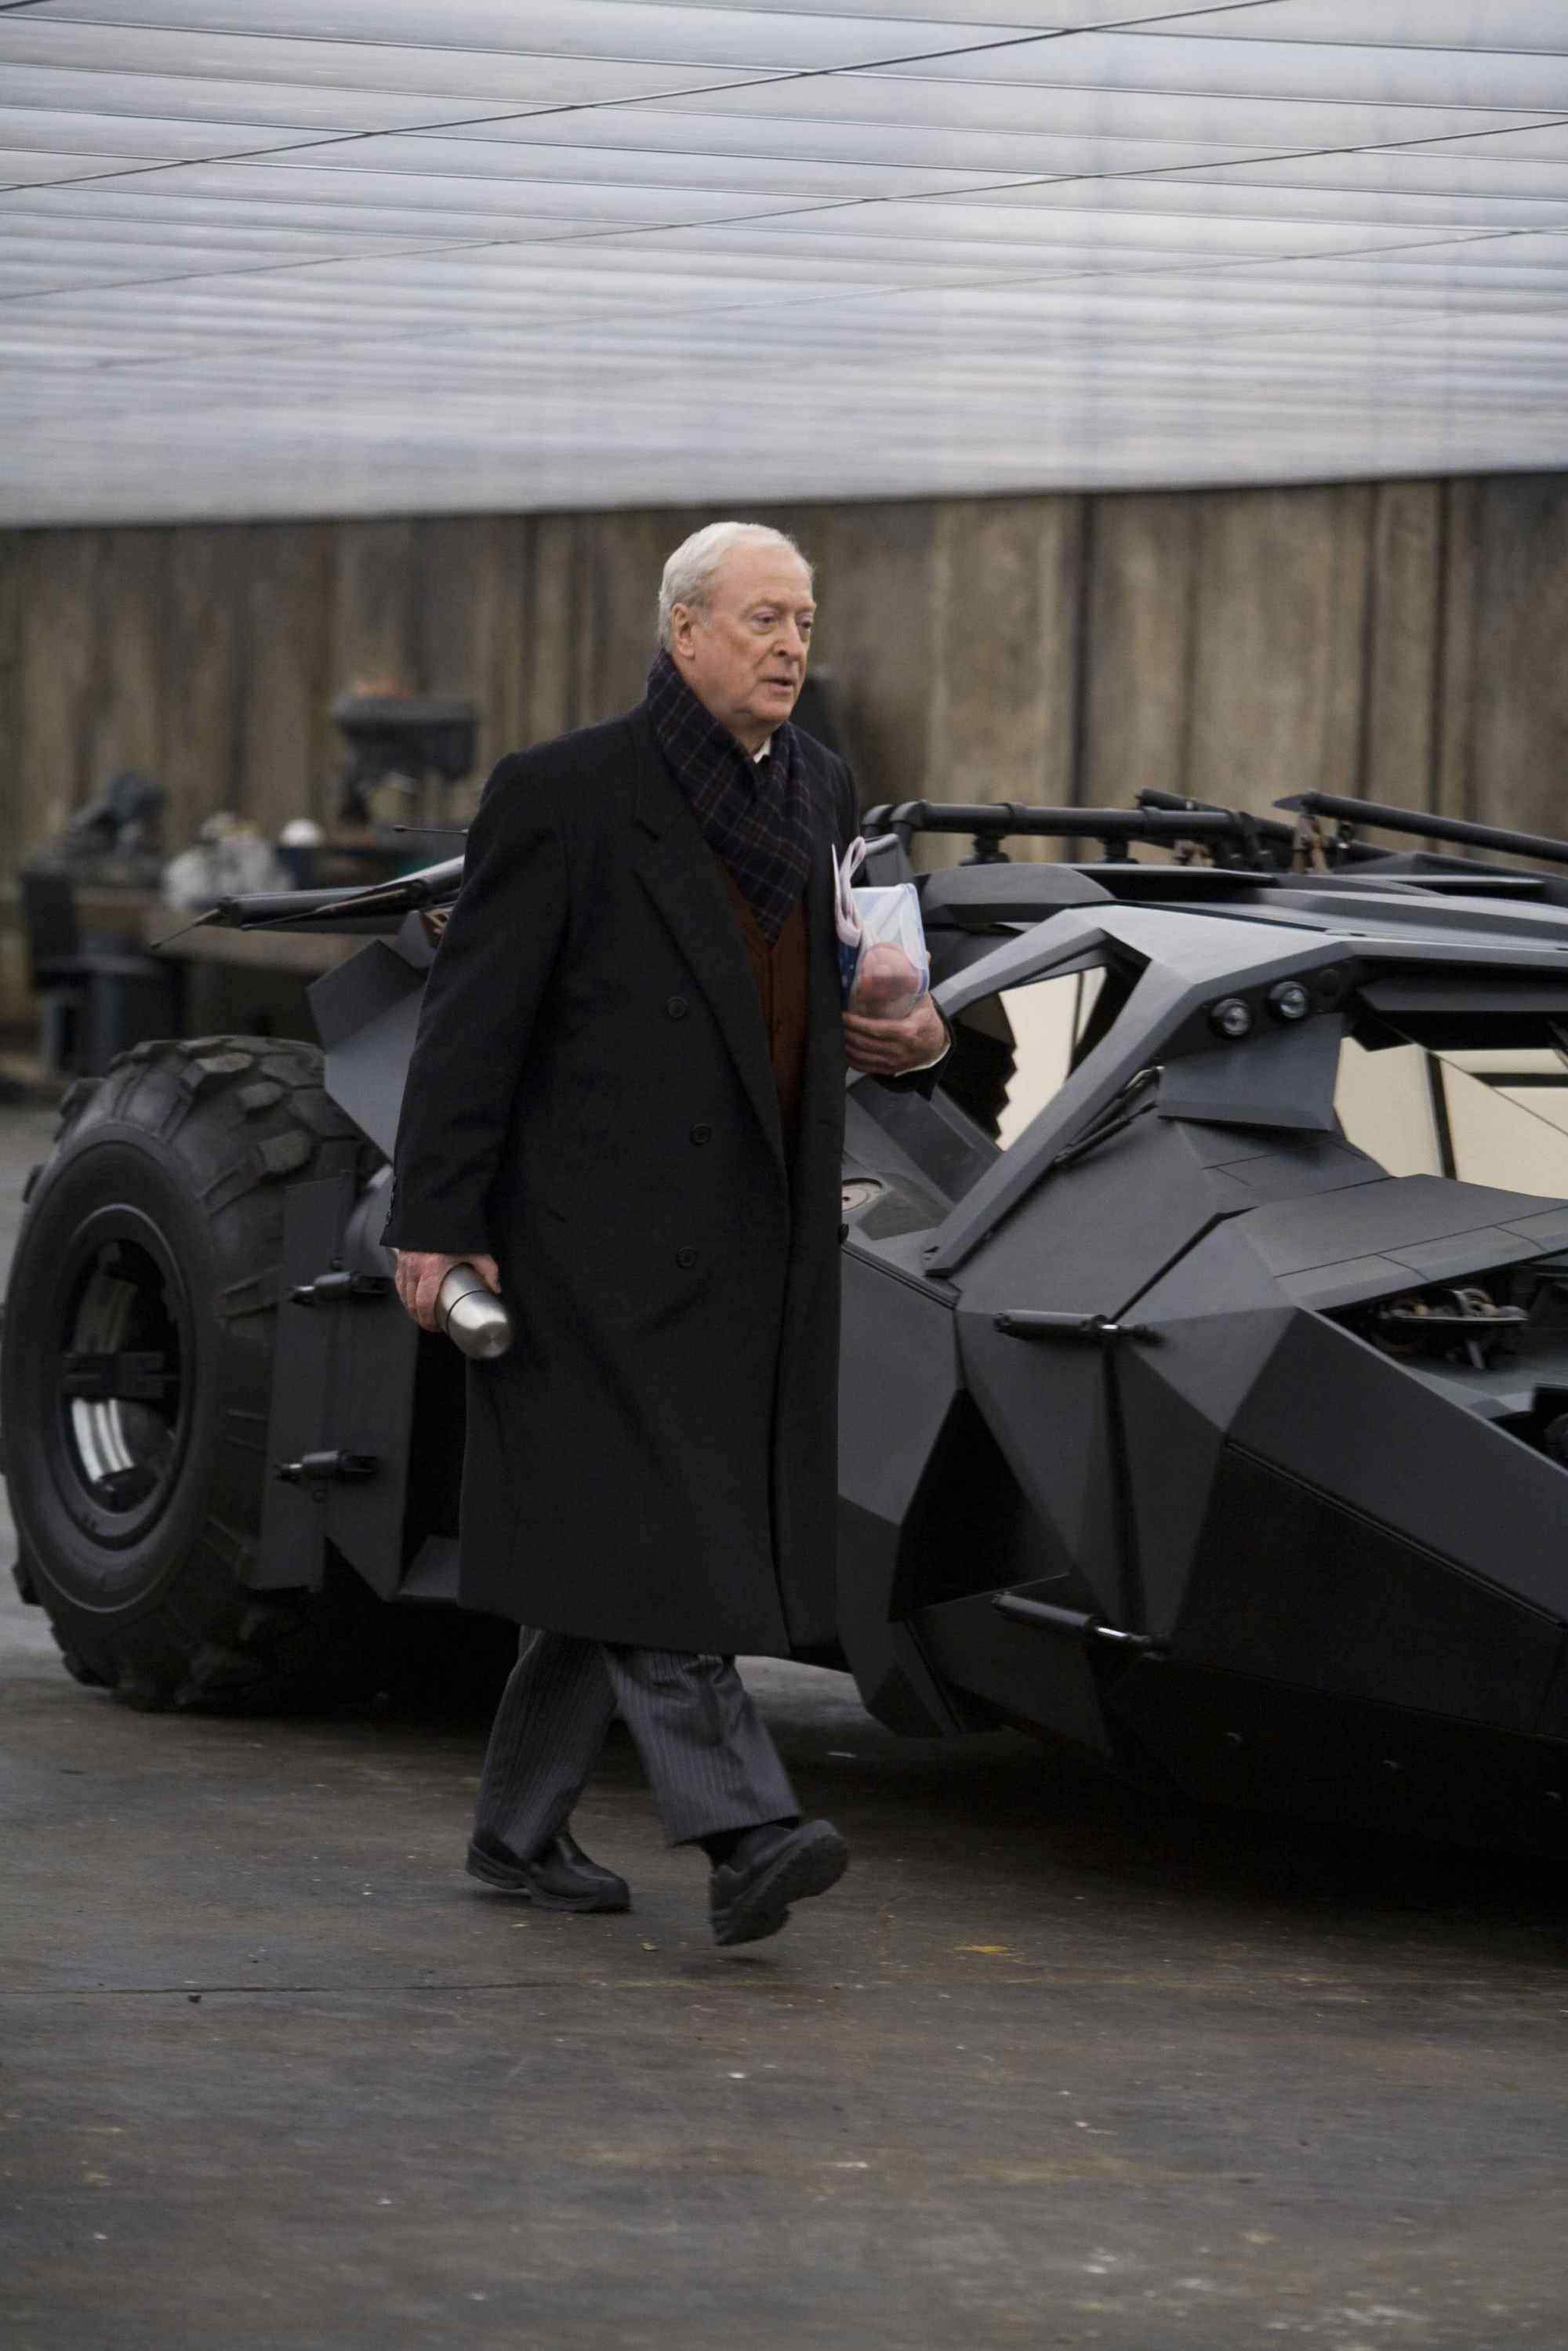 MICHAEL CAINE stars as Alfred Pennyworth in Warner Bros. Pictures' and Legendary Pictures' action drama 